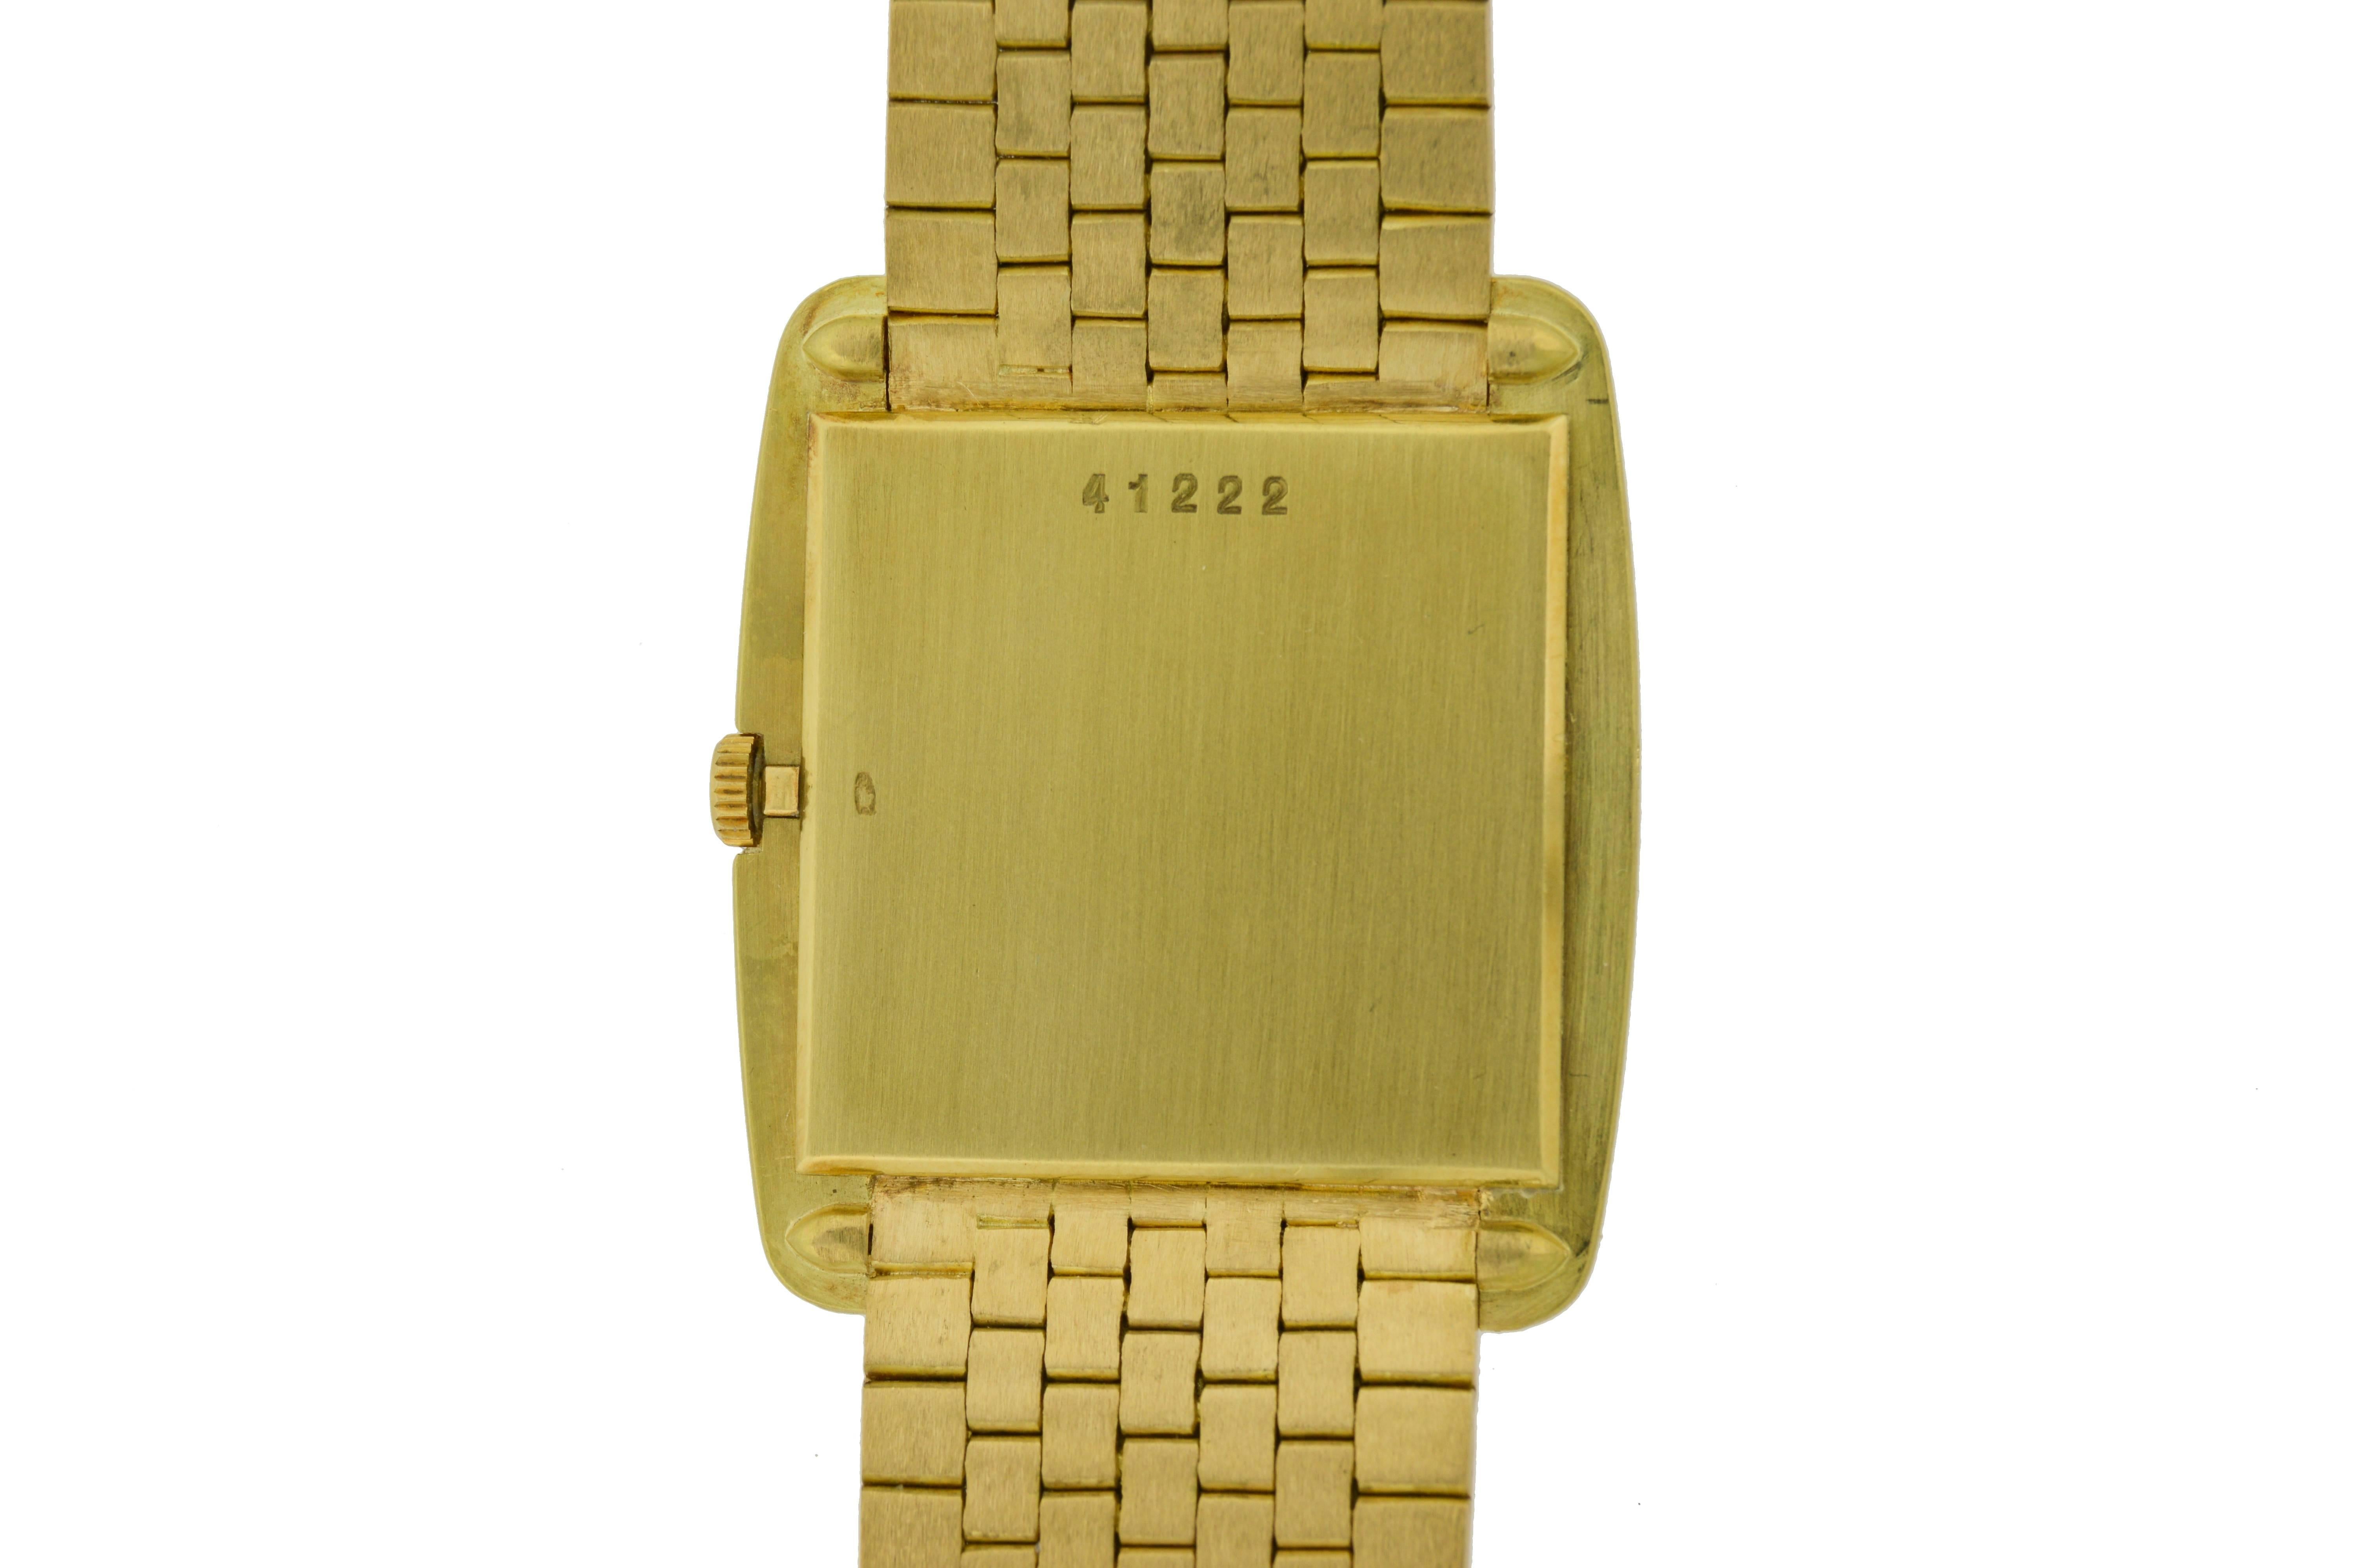 FACTORY / HOUSE: Audemars Piguet
STYLE / REFERENCE: Ultra Thin Bracelet Watch
METAL / MATERIAL: 18Kt Solid Yellow Gold
DIMENSIONS: 30mm X 27mm
CIRCA: 1960's / 1970's
MOVEMENT / CALIBER: Manual Winding / 18 Jewels 
DIAL / HANDS: Original Florentine